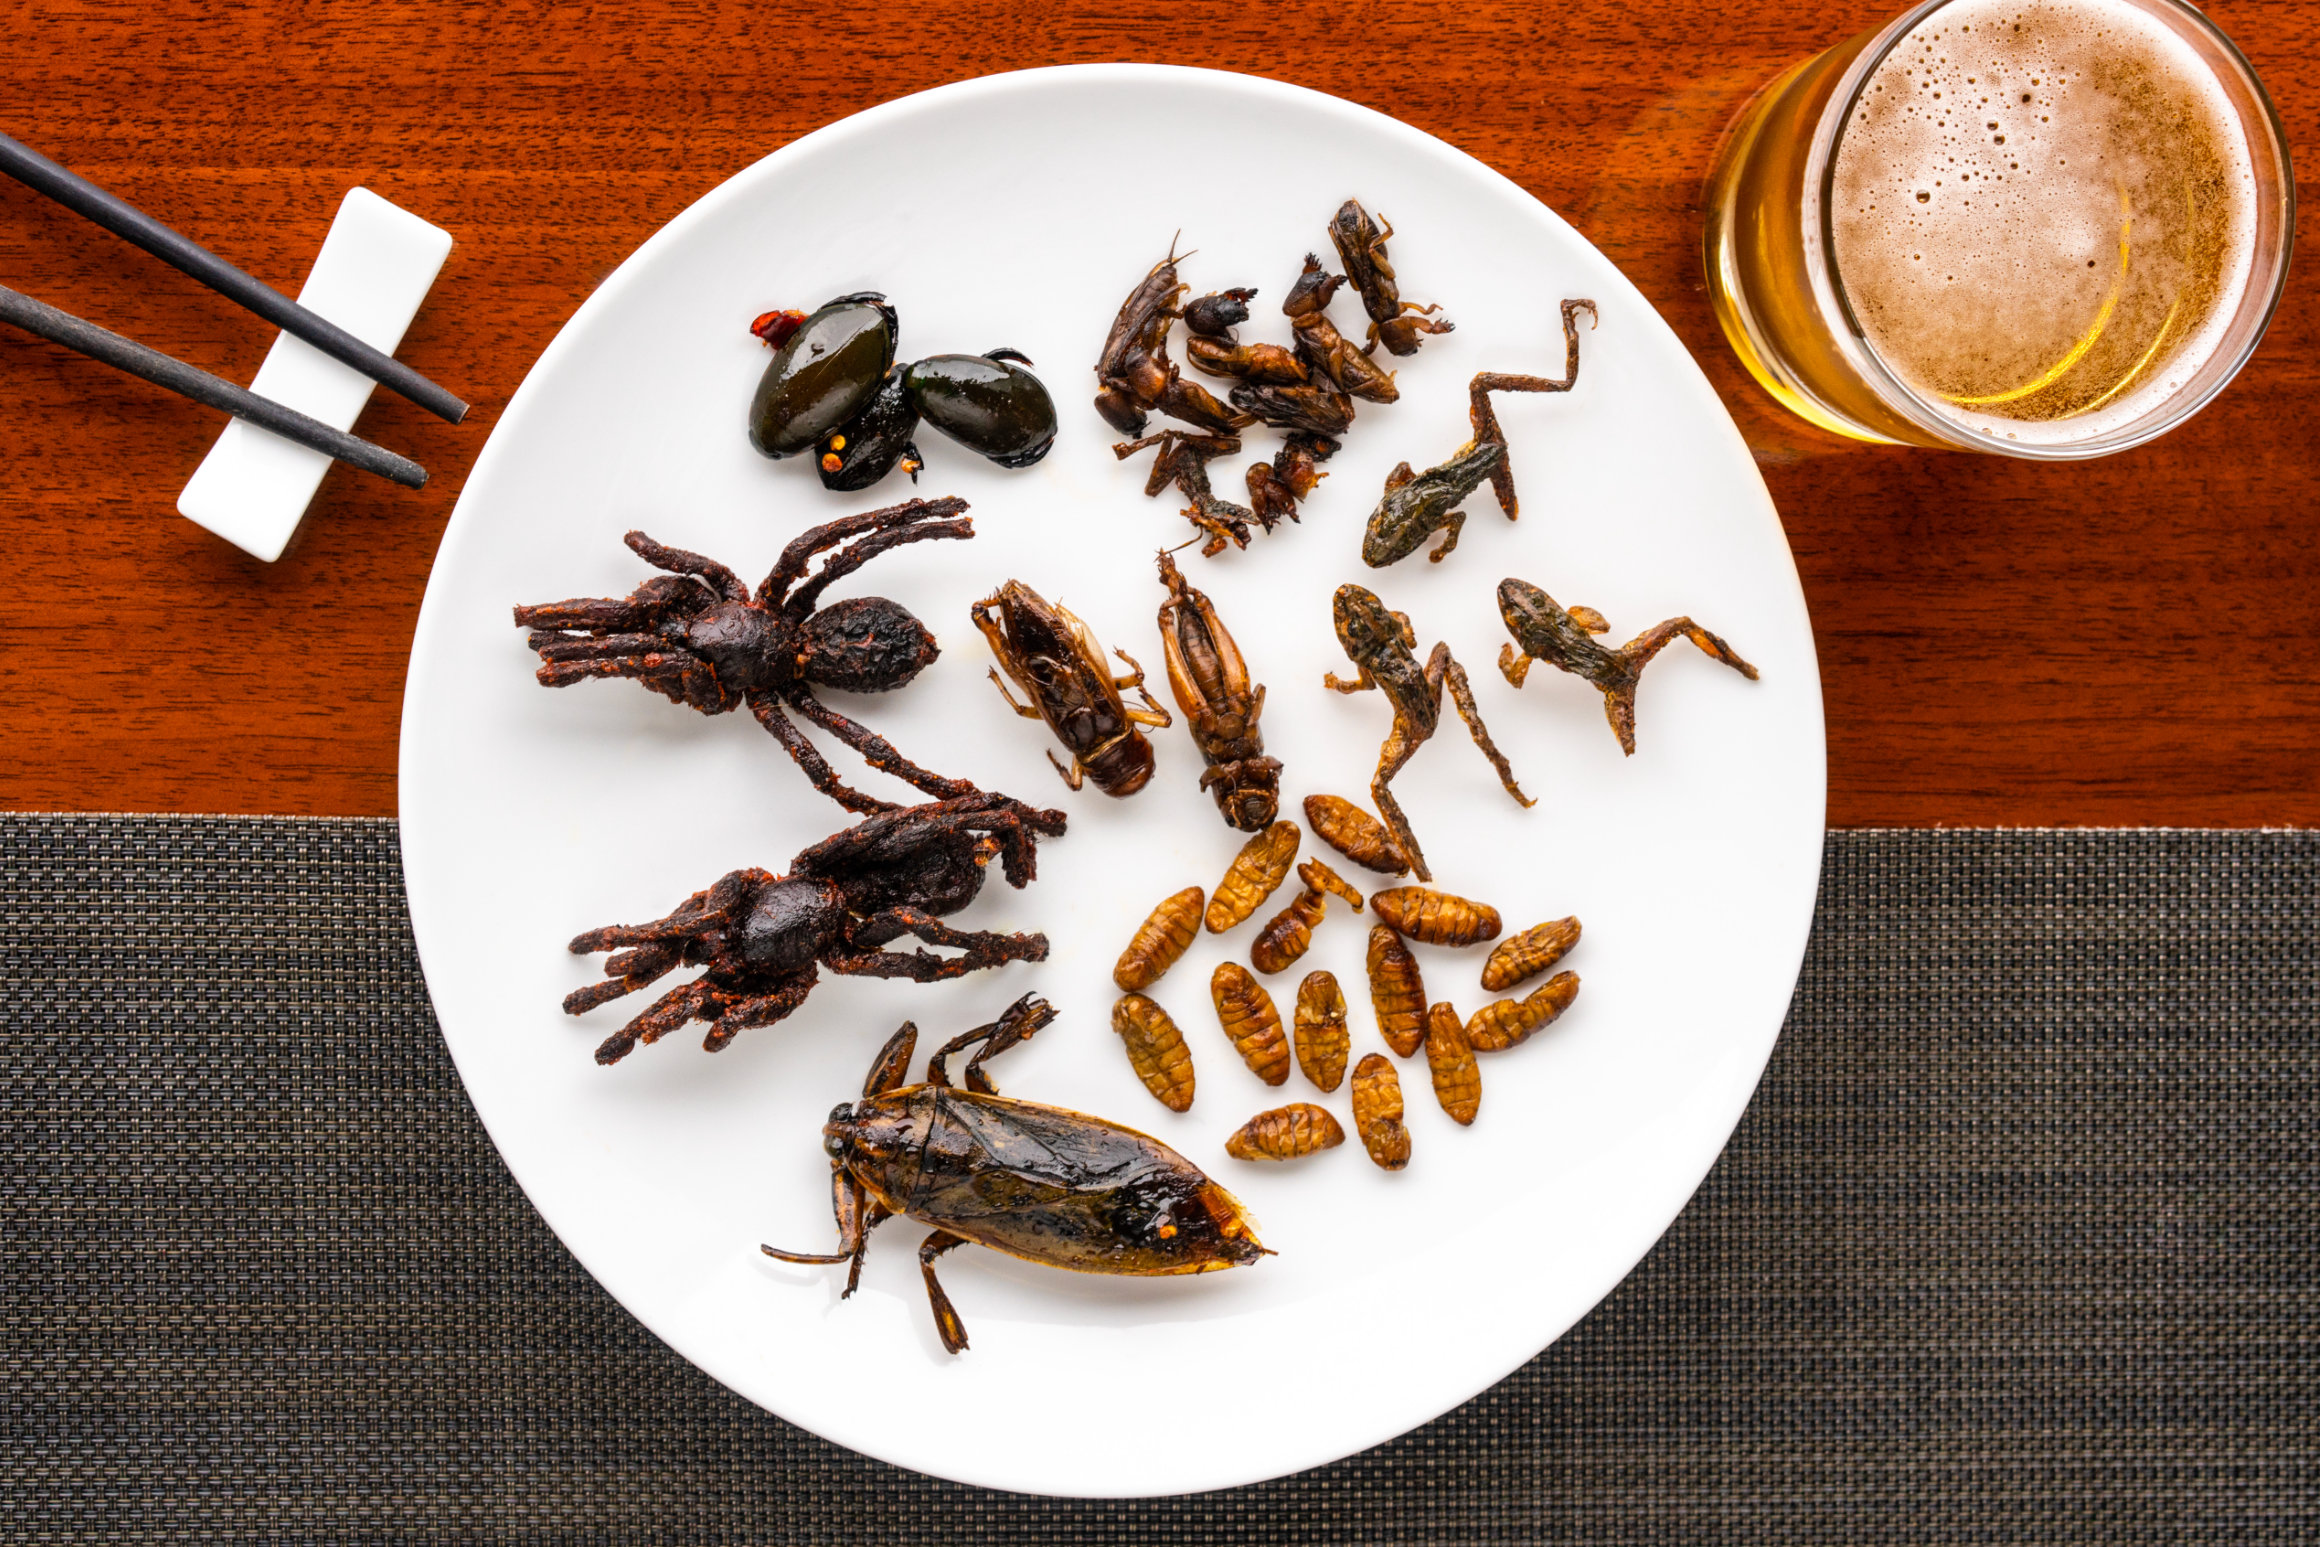 Fried tarantula, crickets, frogs and beetles - Cambodian Food